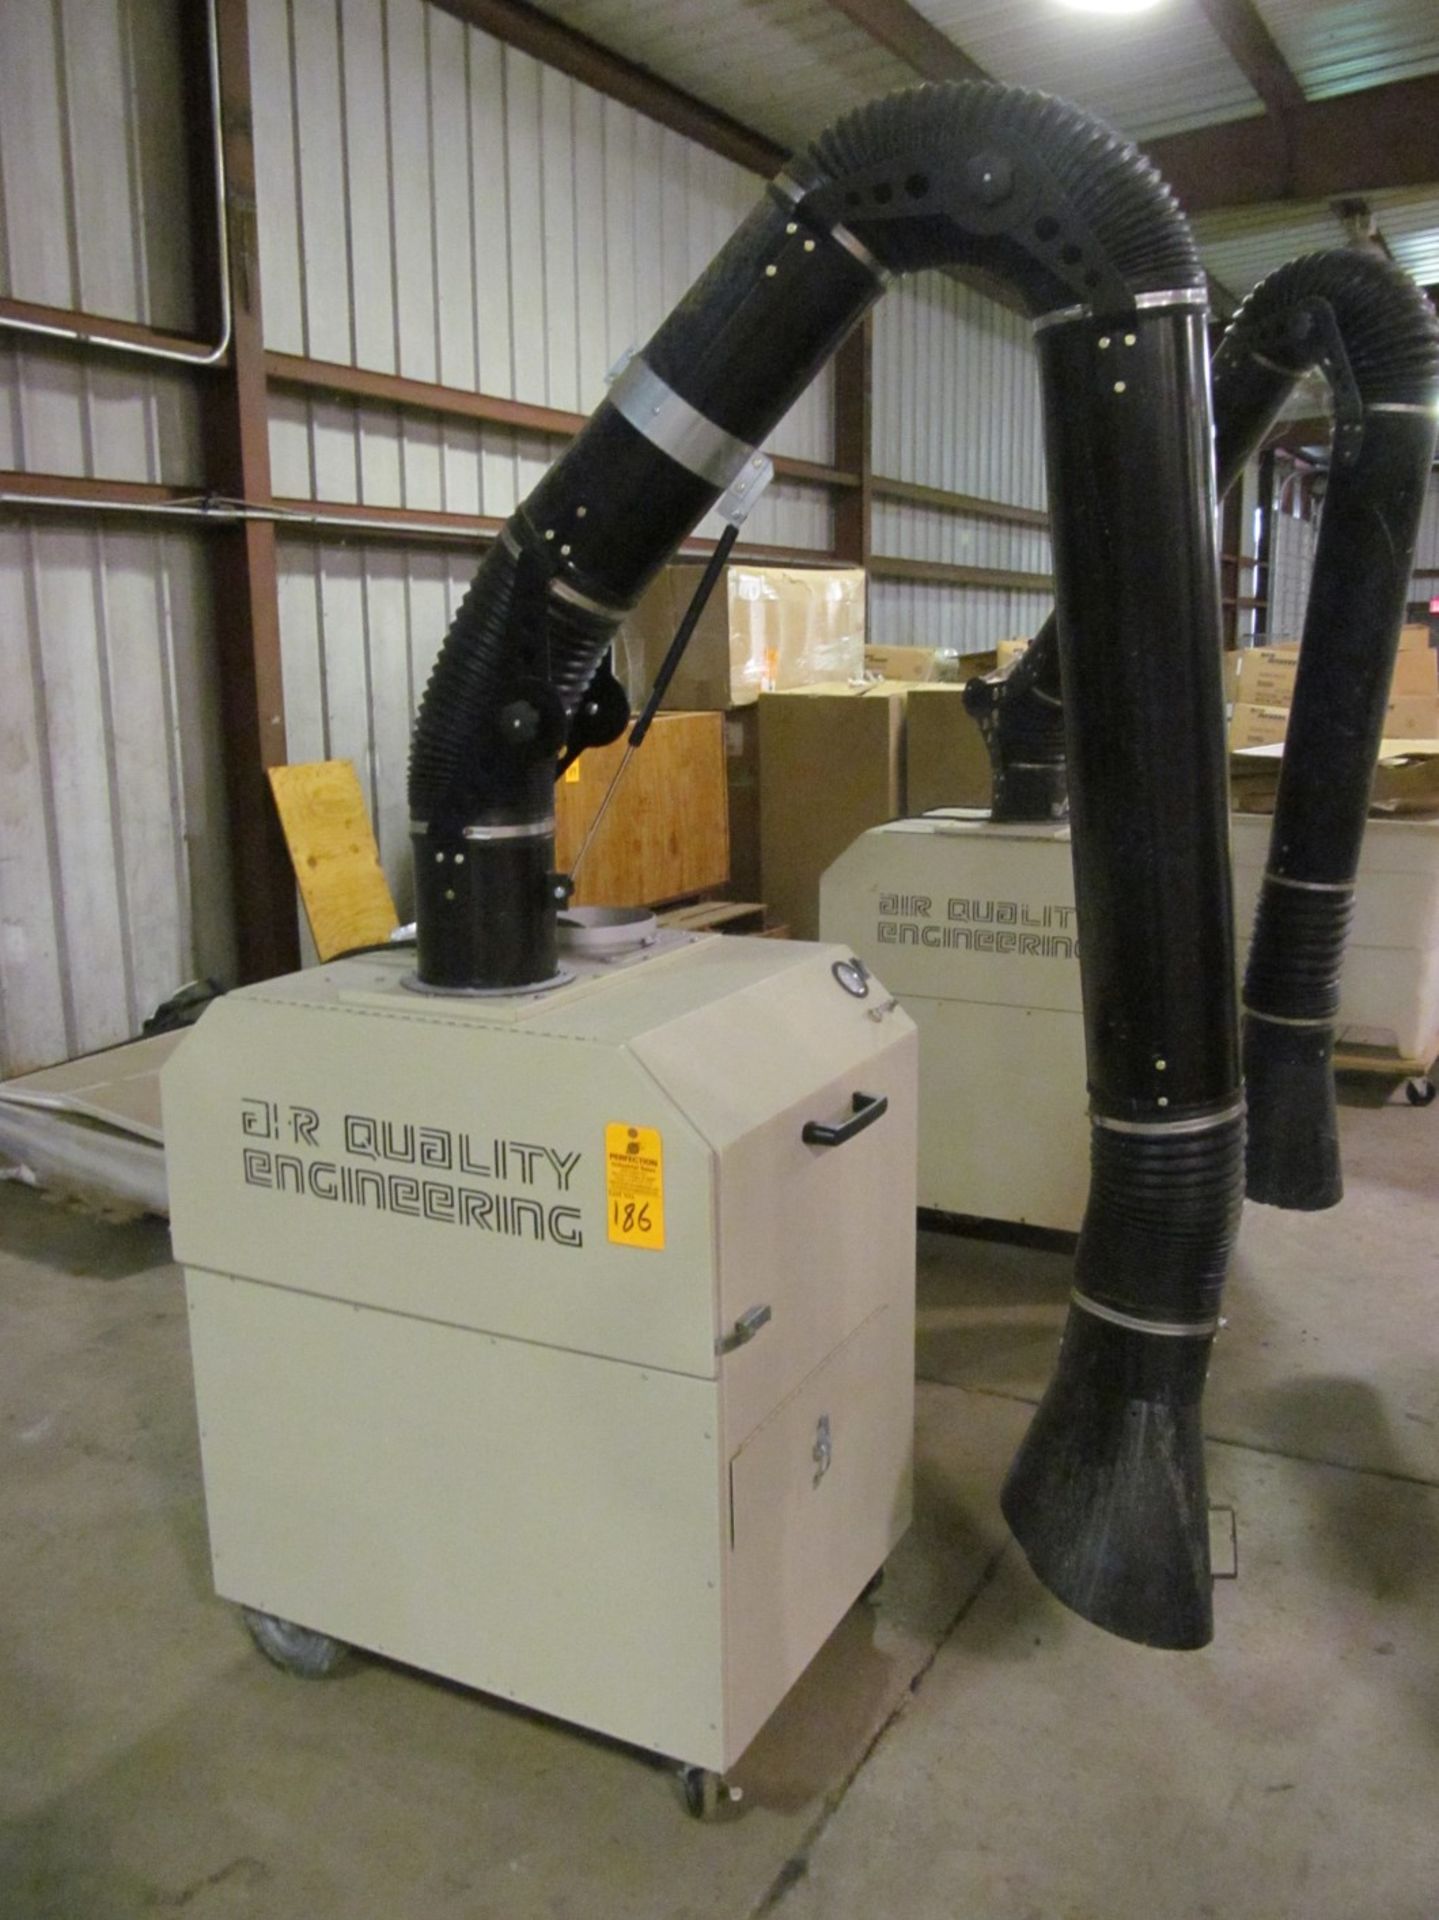 Air Quality Engineering AQE2000 Portable Dust Collector, s/n 1537B0599B